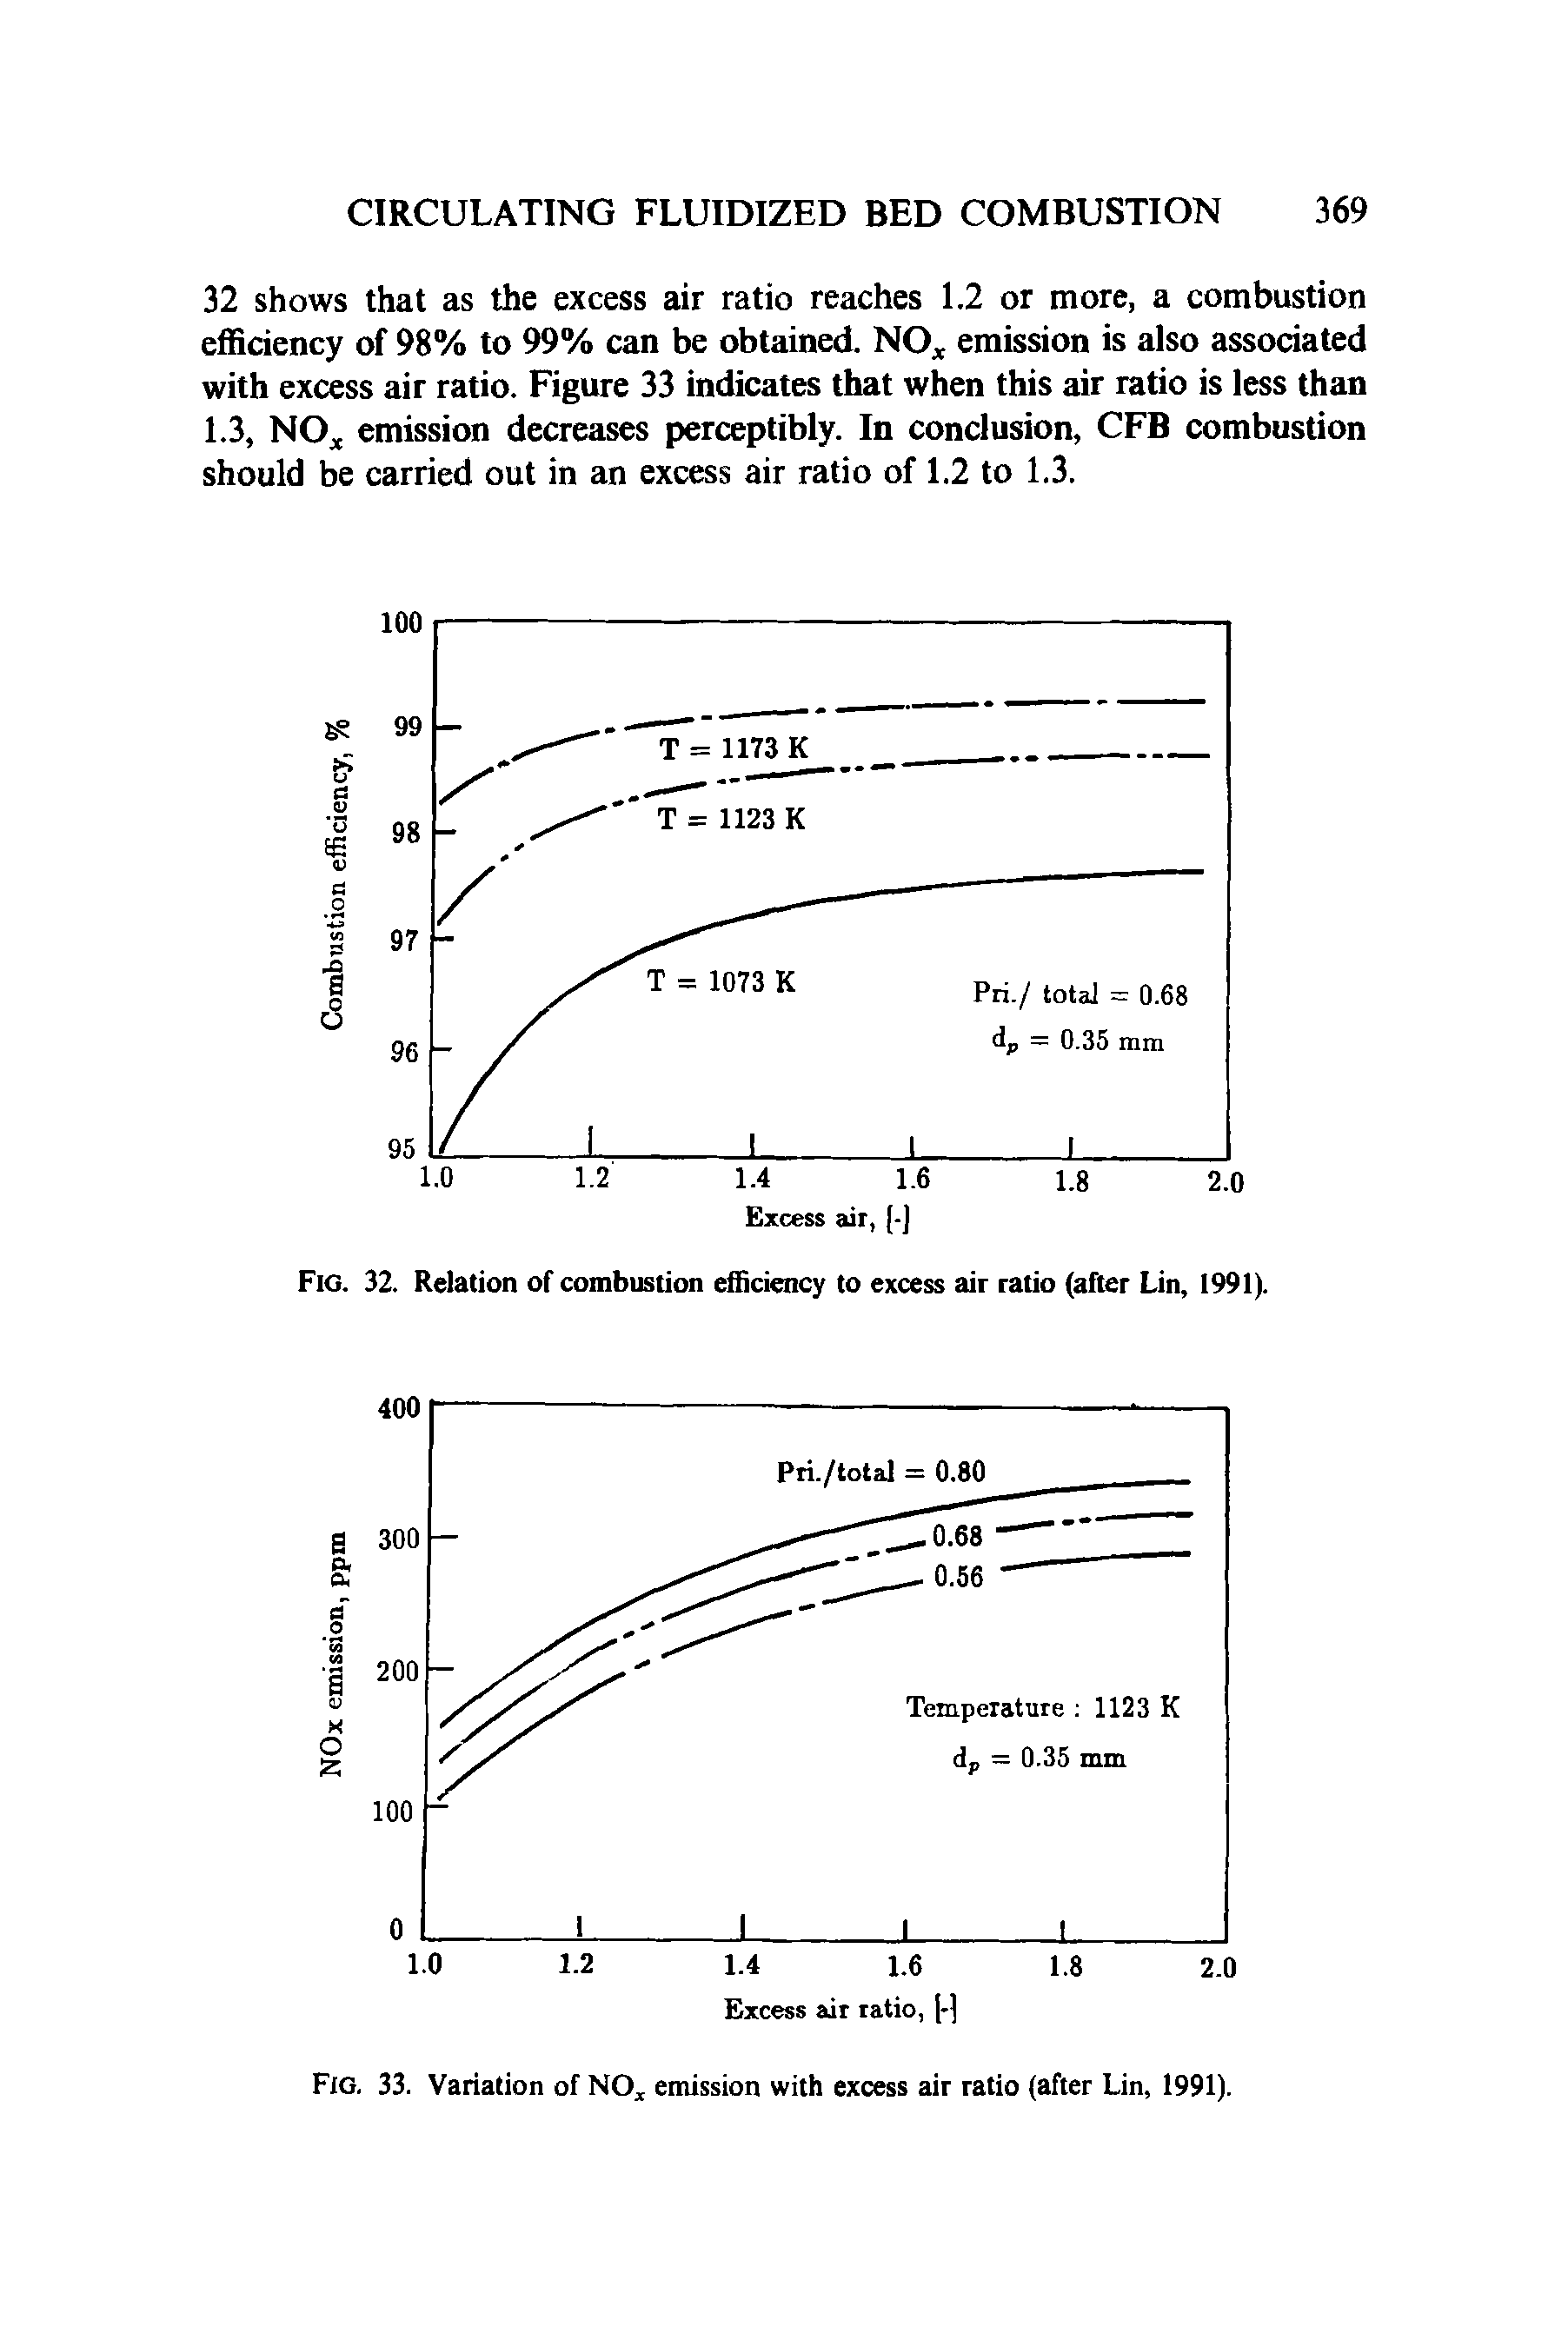 Fig. 32. Relation of combustion efficiency to excess air ratio (after Lin, 1991).